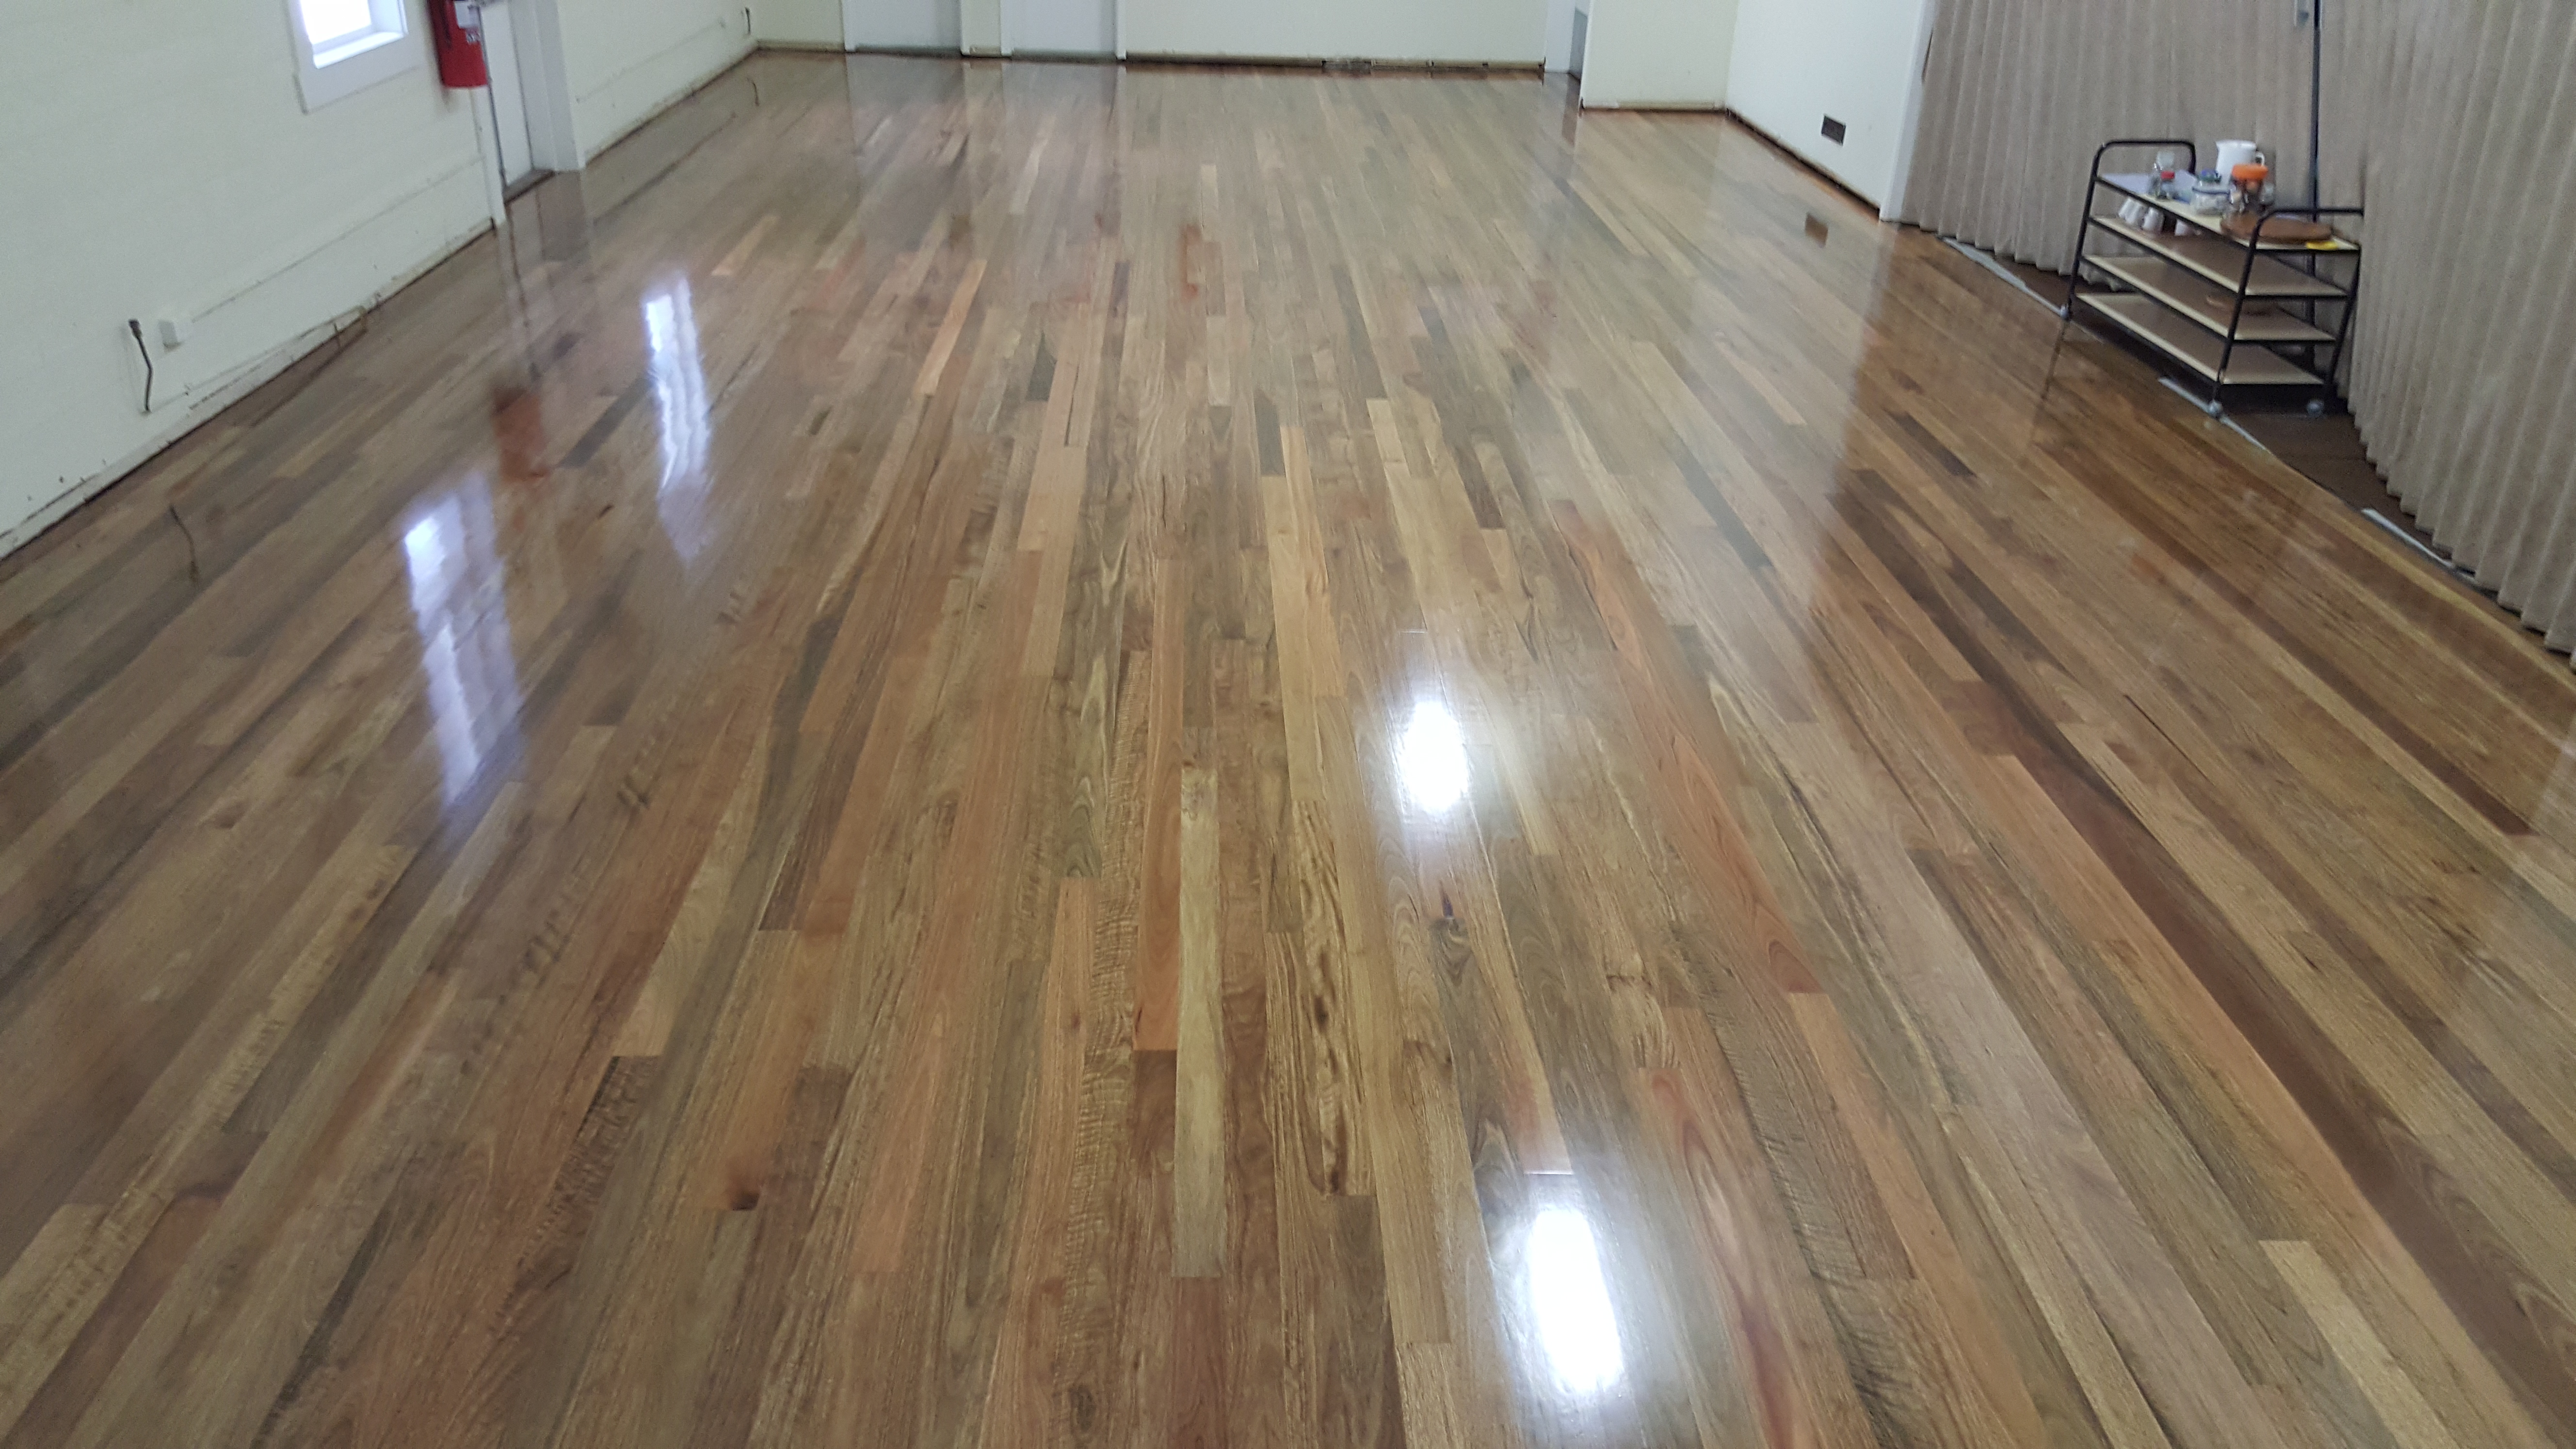 About Superbly Polished Floor